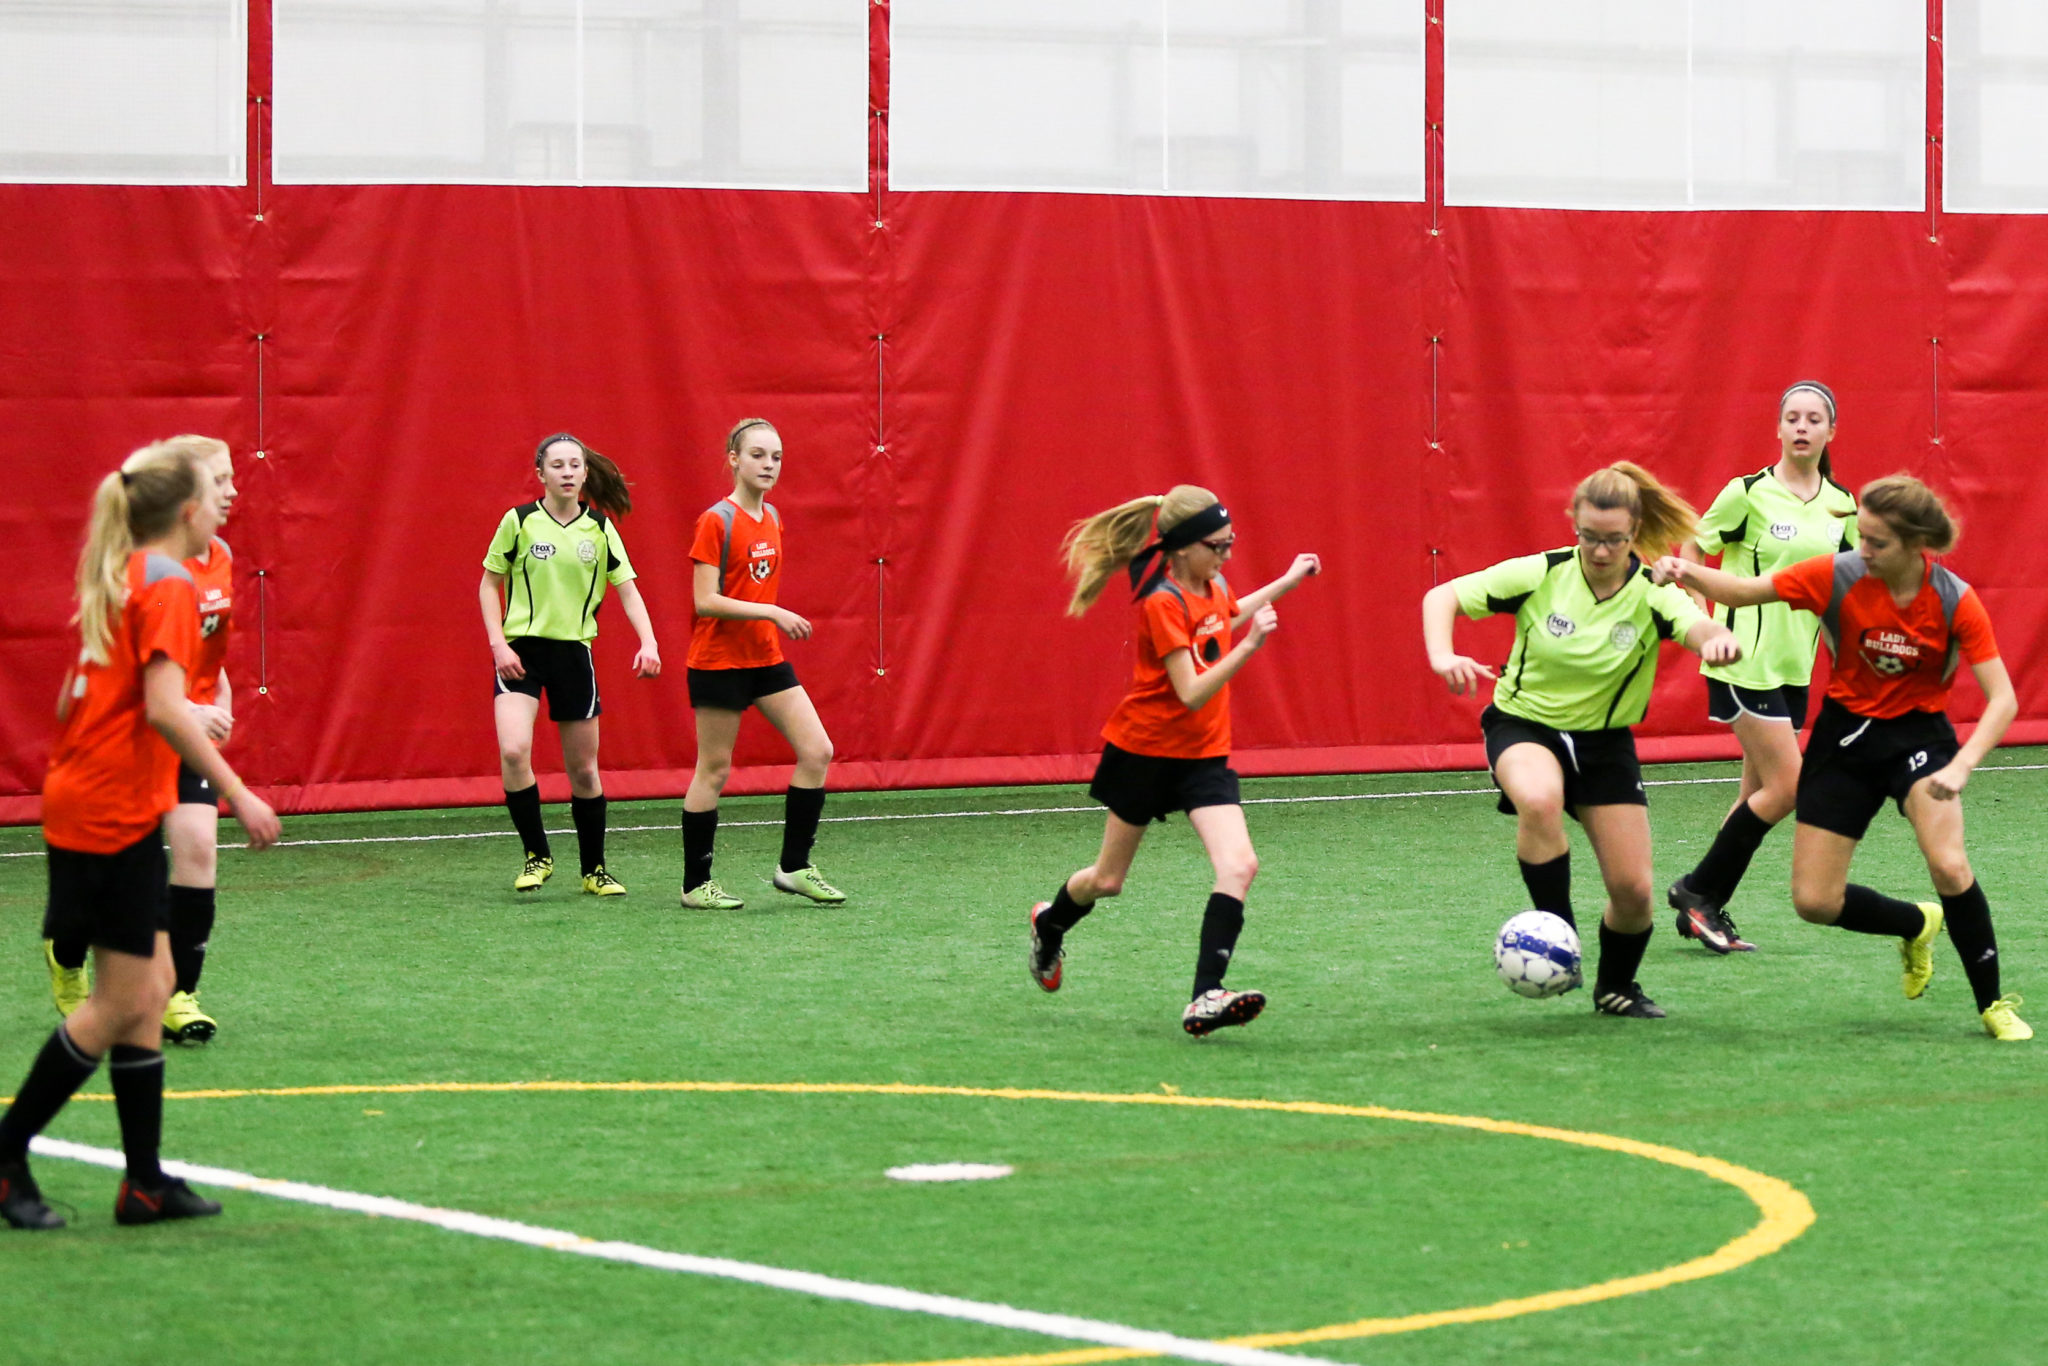 Youth Soccer Coaching: It’s not all about winning.